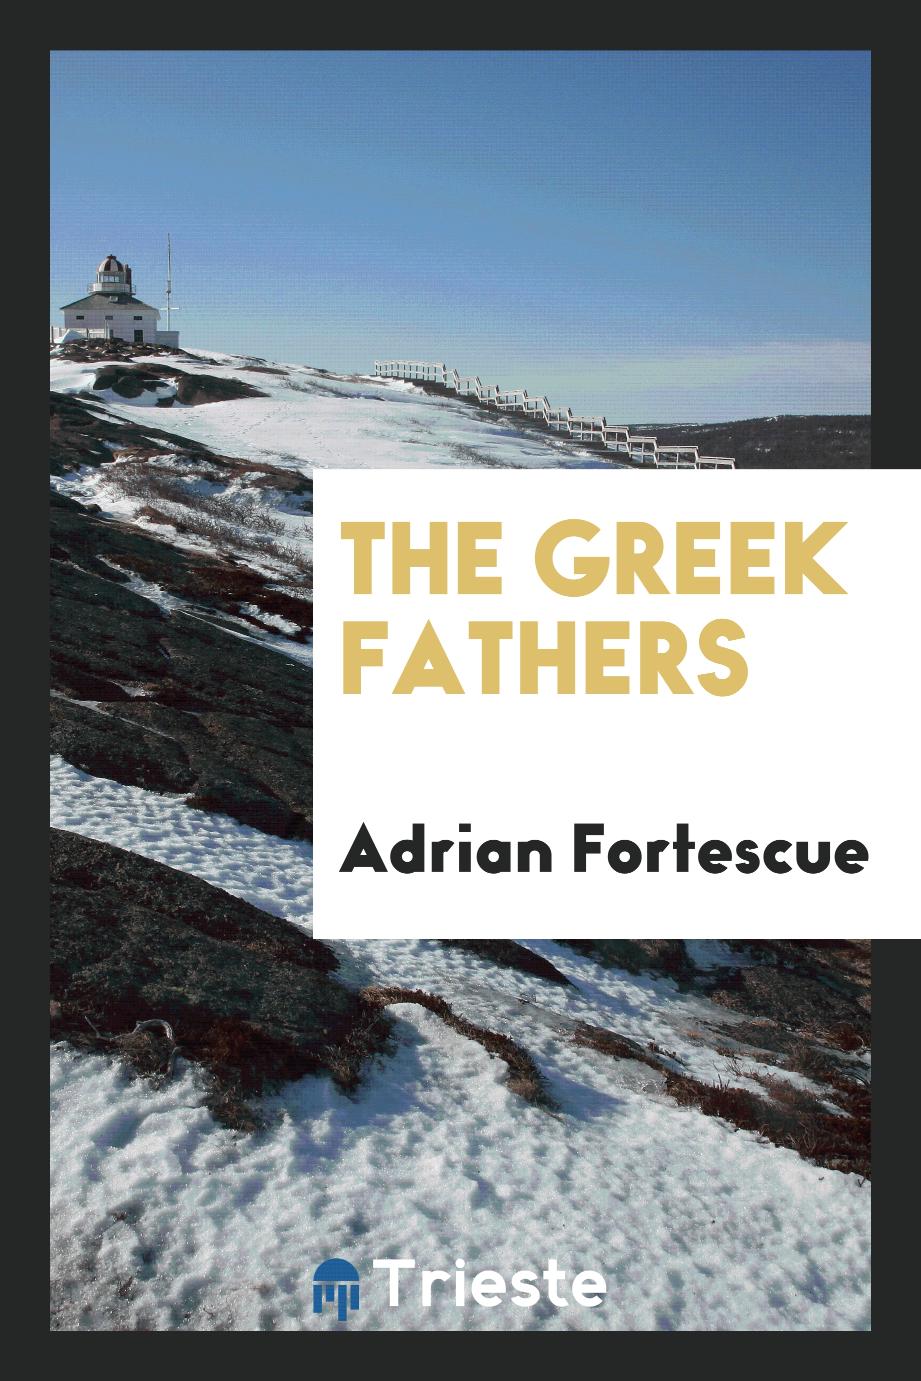 The Greek fathers